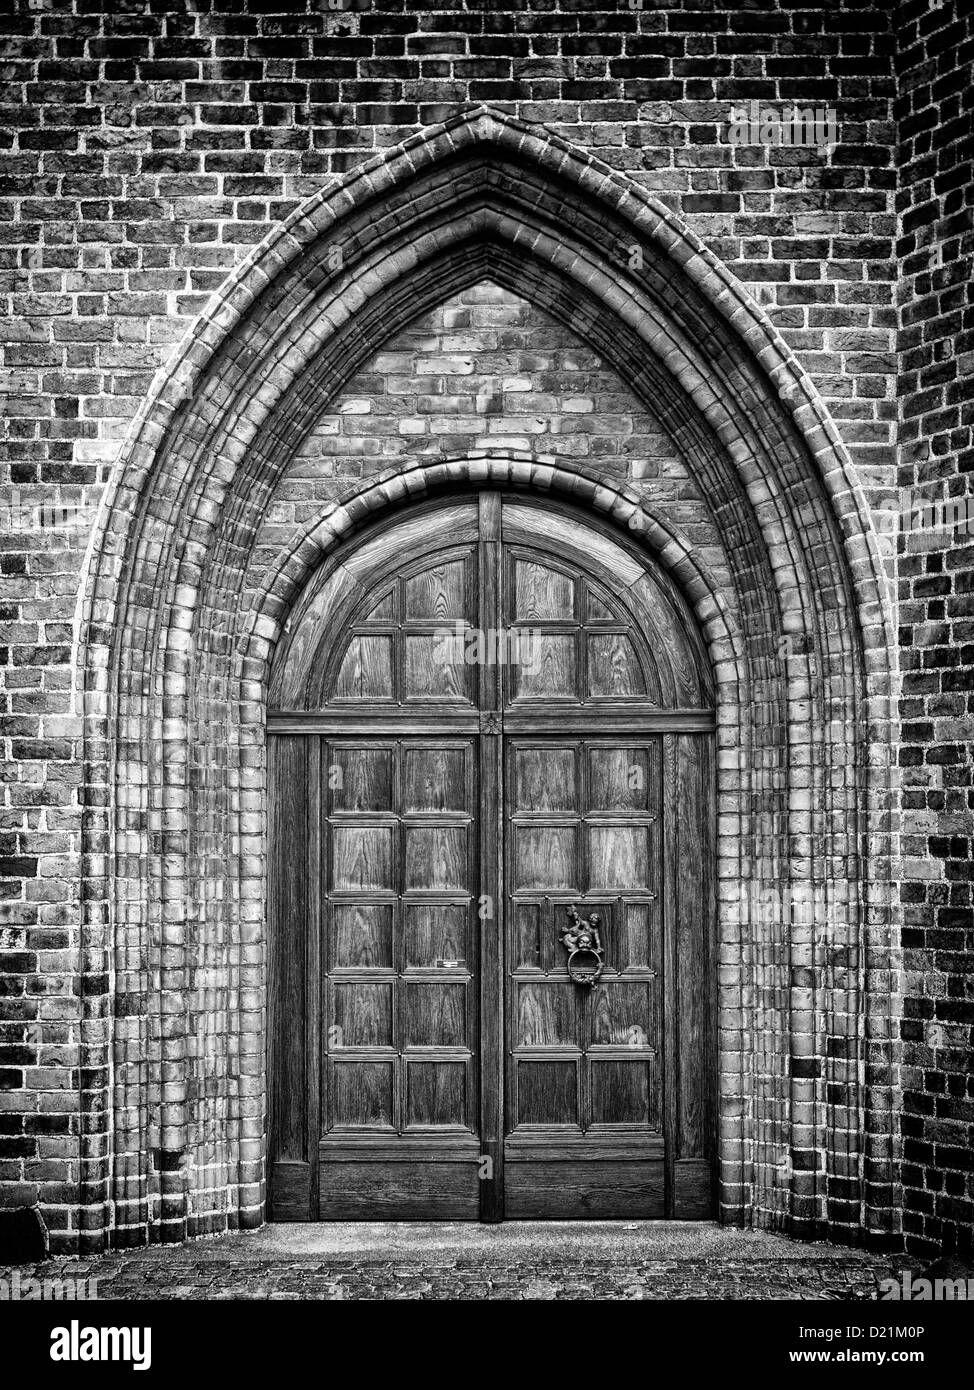 A black and white photo of an arched doorway to a gothic style church. Stock Photo